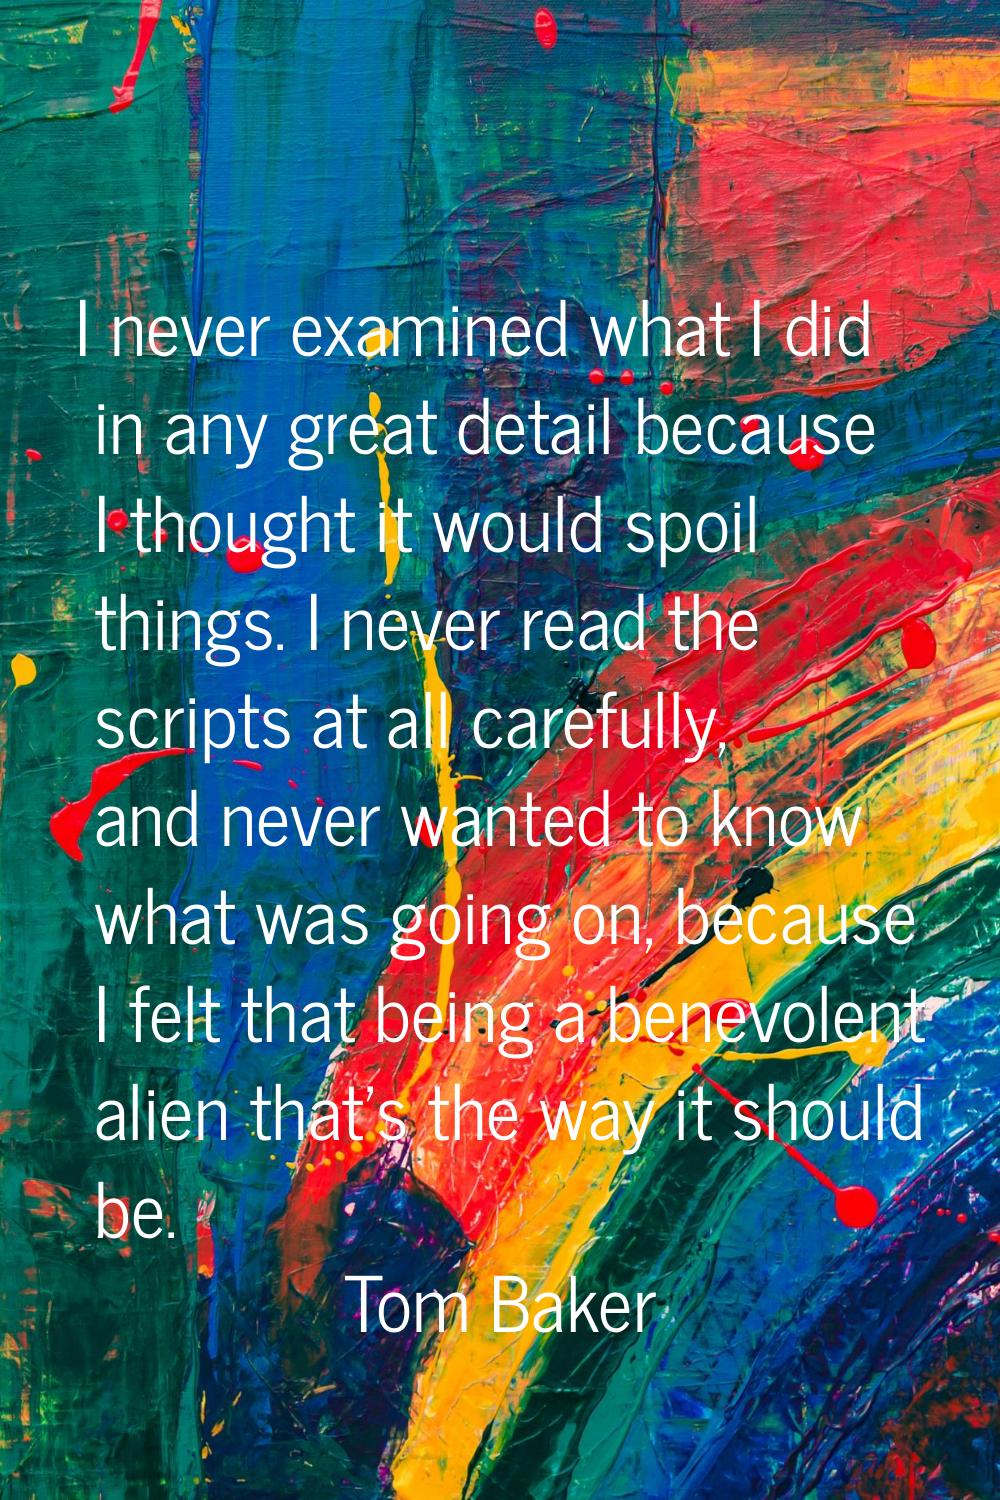 I never examined what I did in any great detail because I thought it would spoil things. I never re